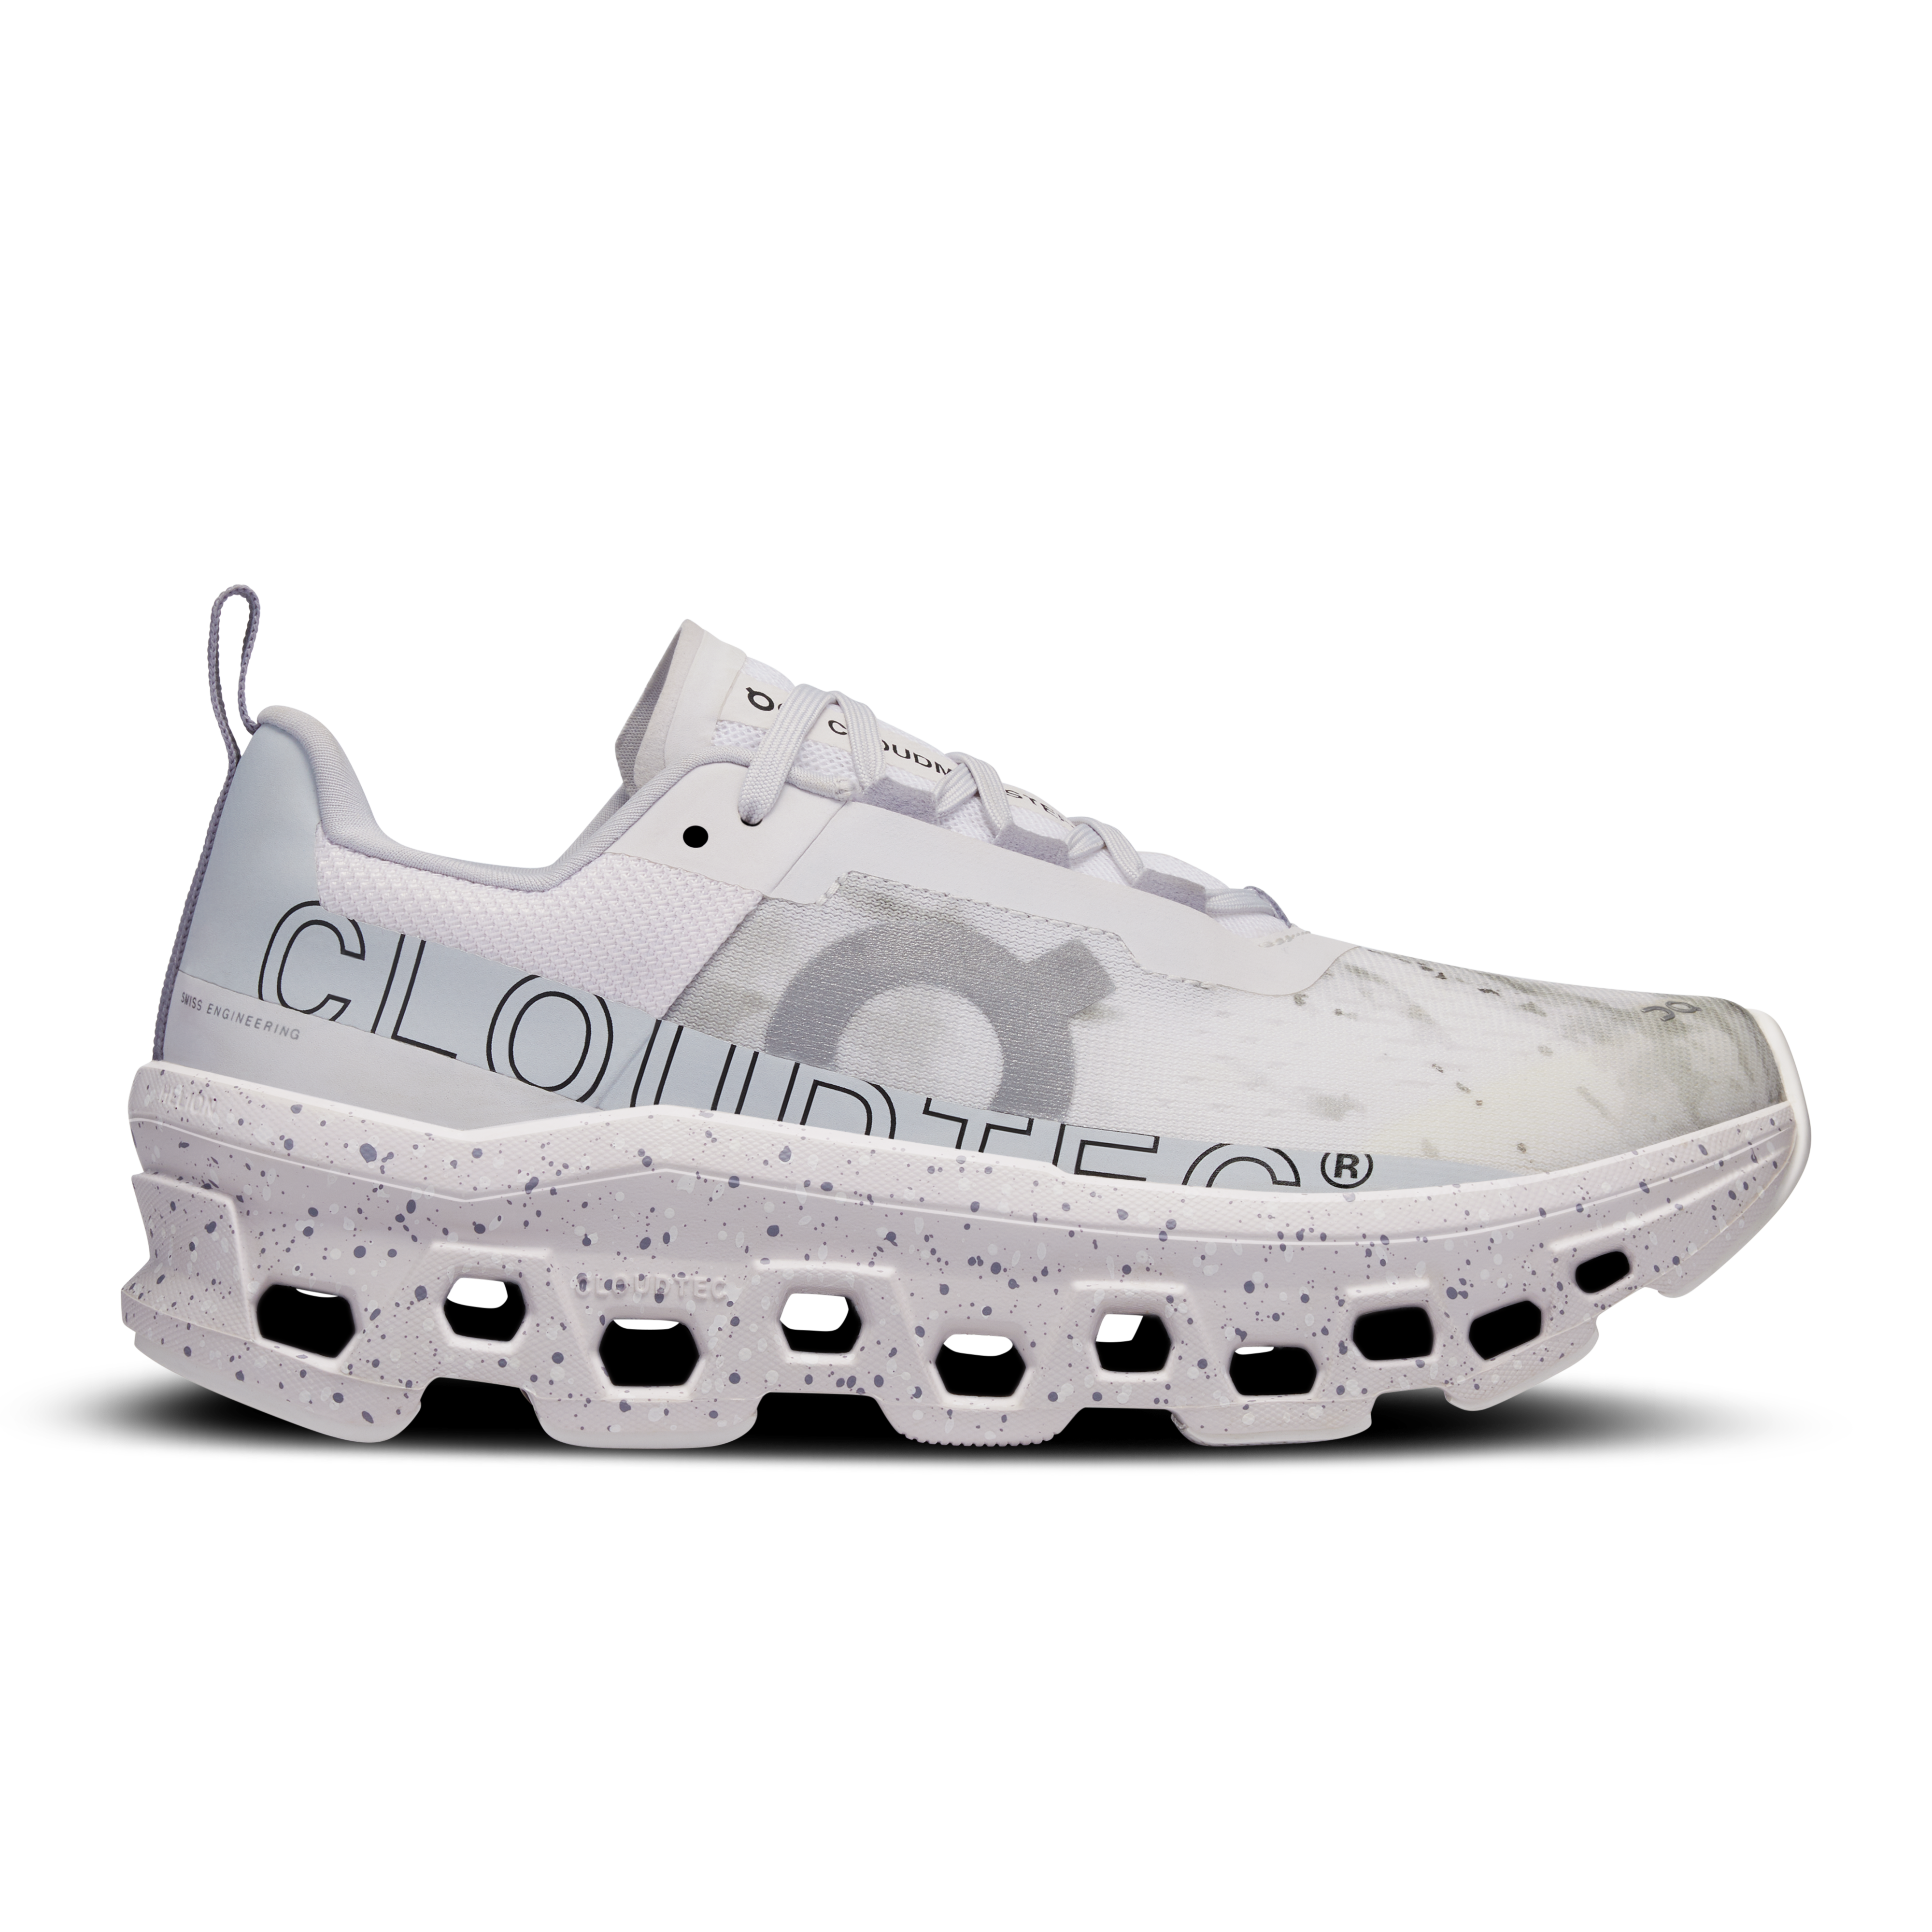 Daily Order real photos,we are a professional distributor of sports shoes  in china